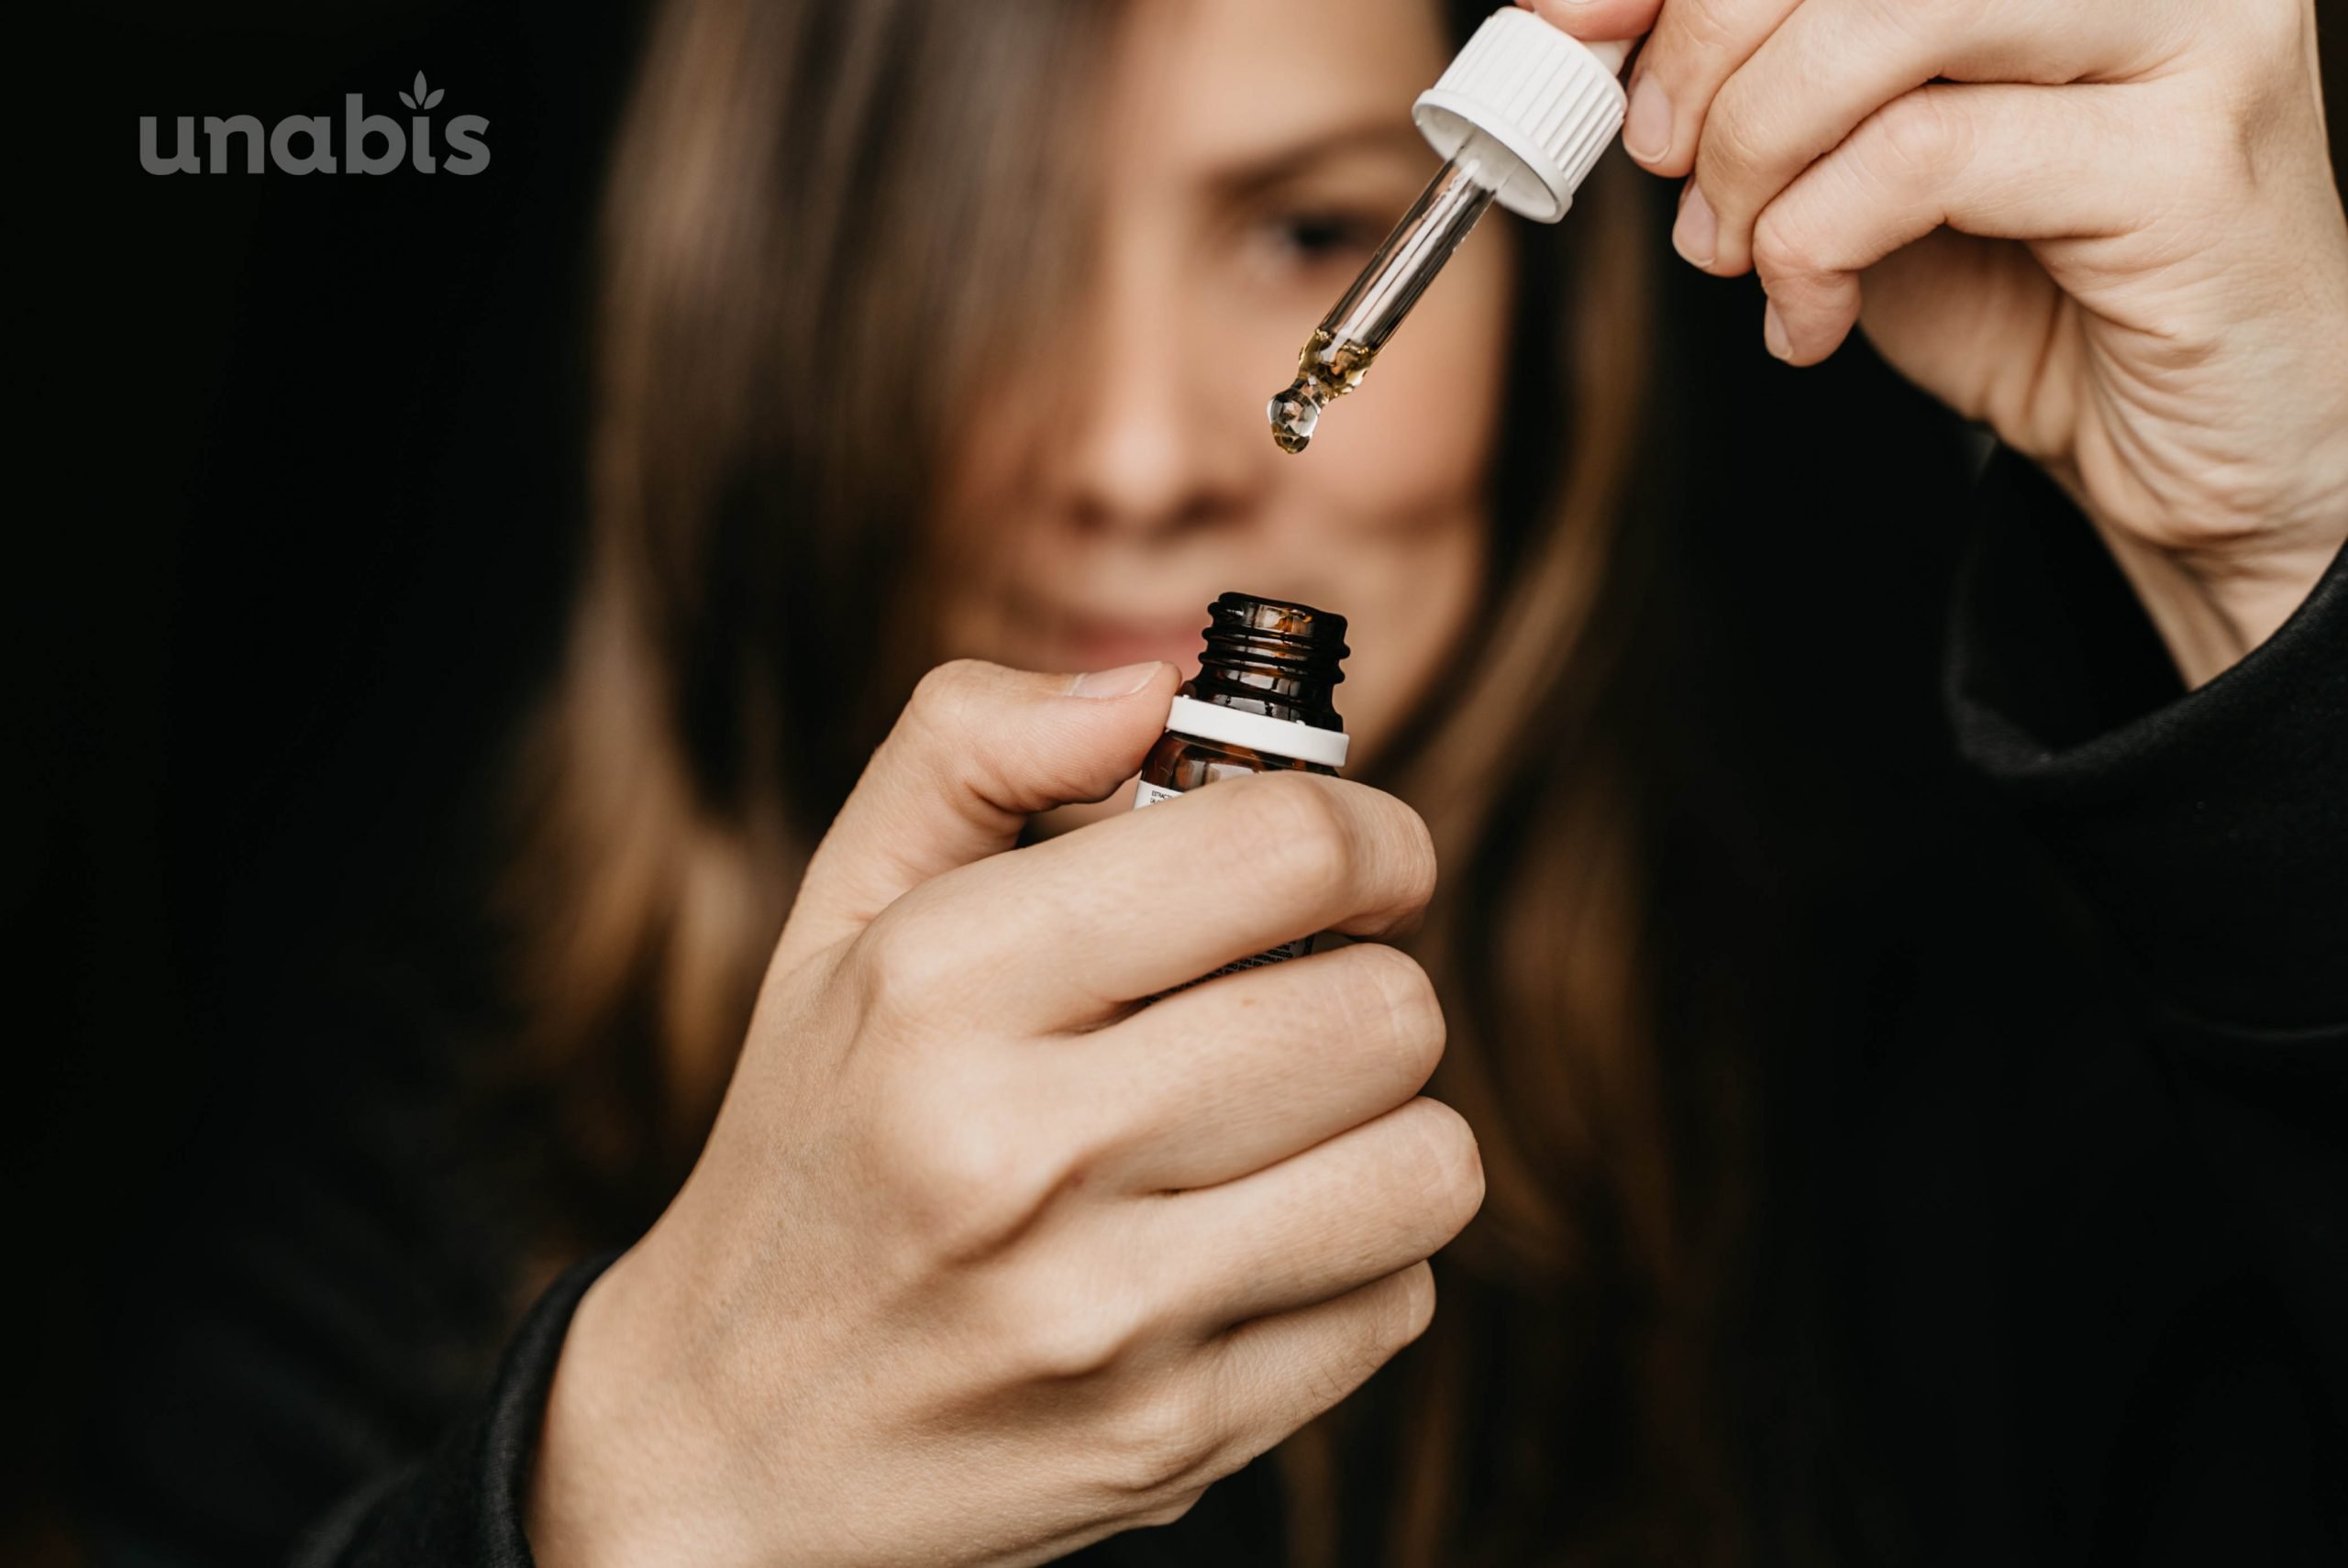 How to Use CBD Oil for Anxiety?